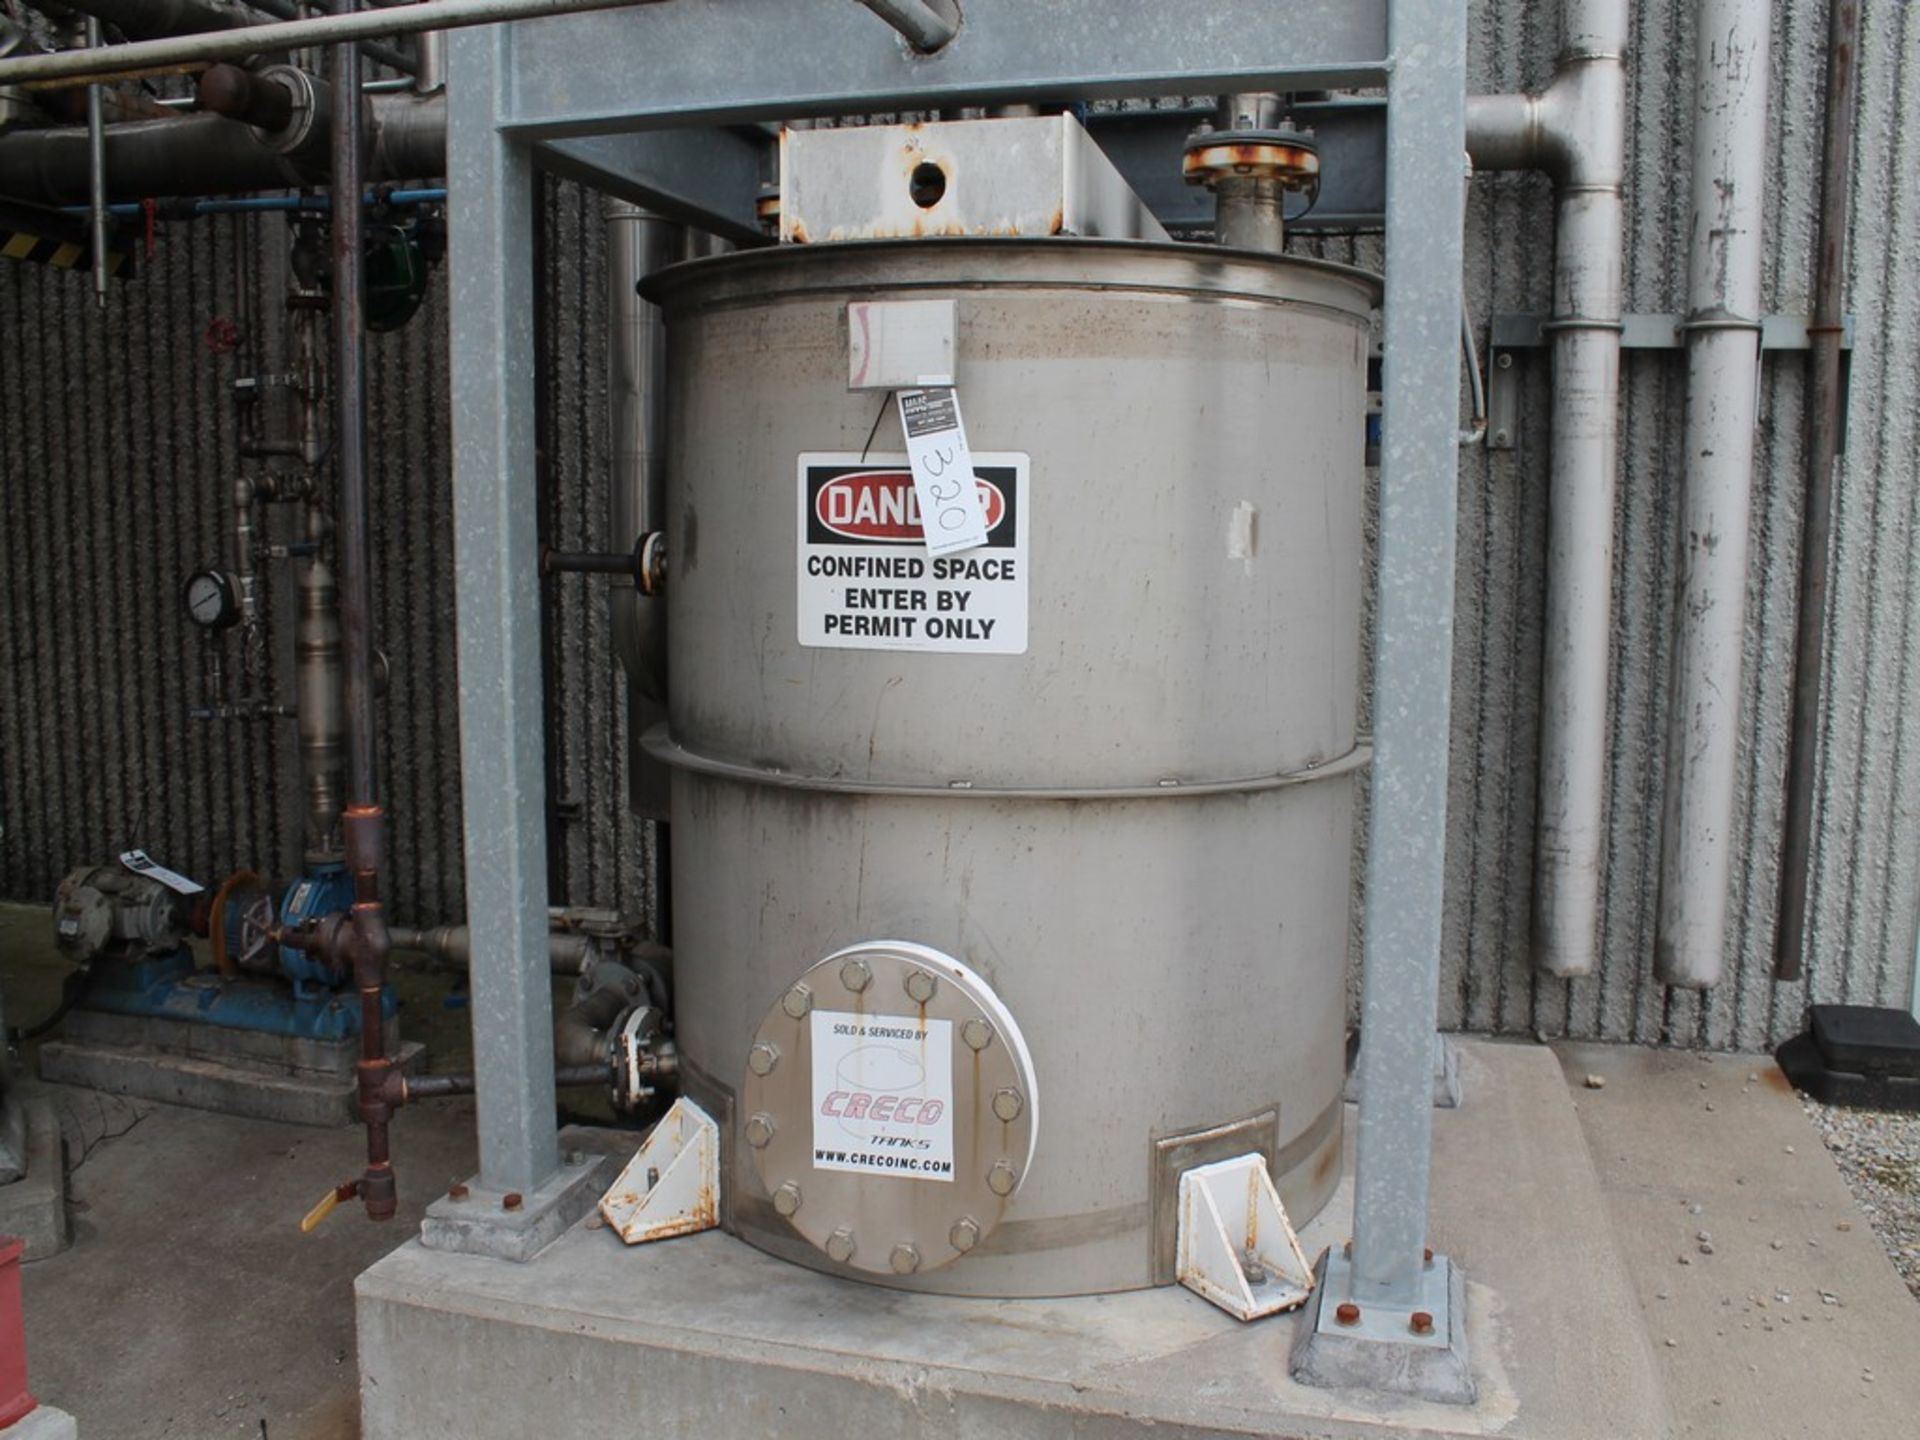 INTERNATIONAL PRODUCTION SPECIALISTS INC. LOT STAINLESS STEEL WASH SOLVENT TANK - Image 2 of 13